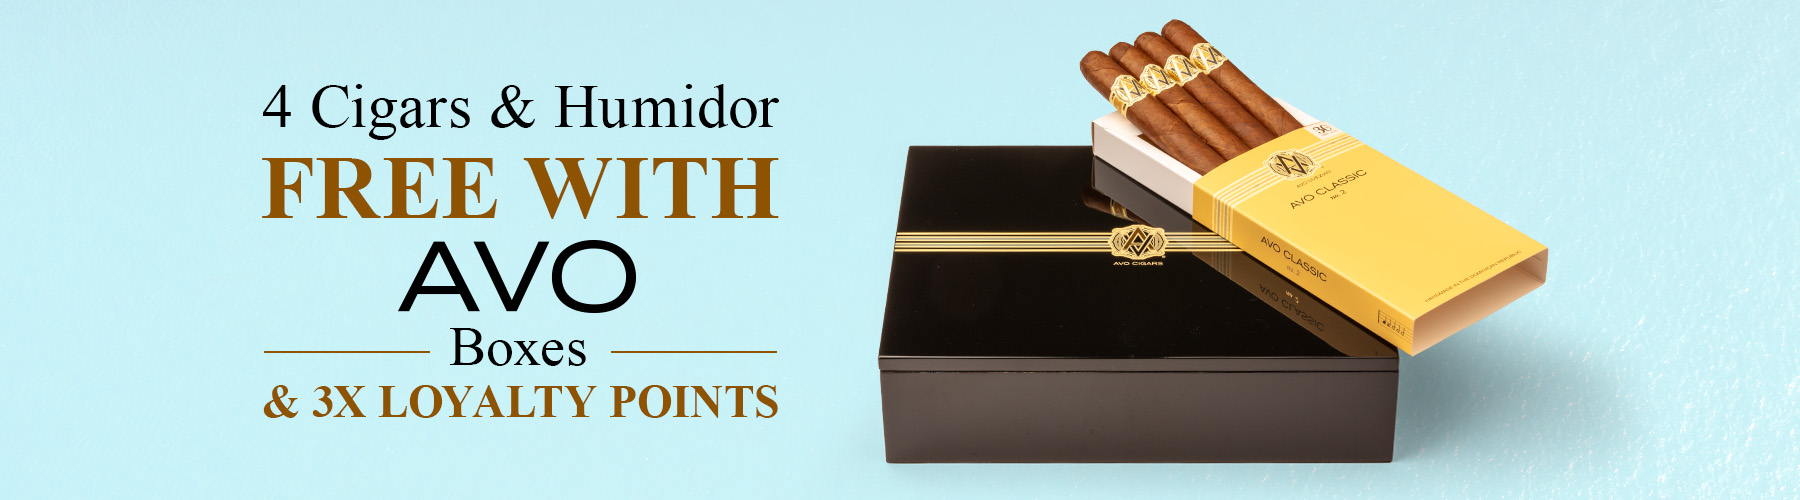 4 Cigars & Humidor Free with AVO boxes + 3X Loyalty Points!